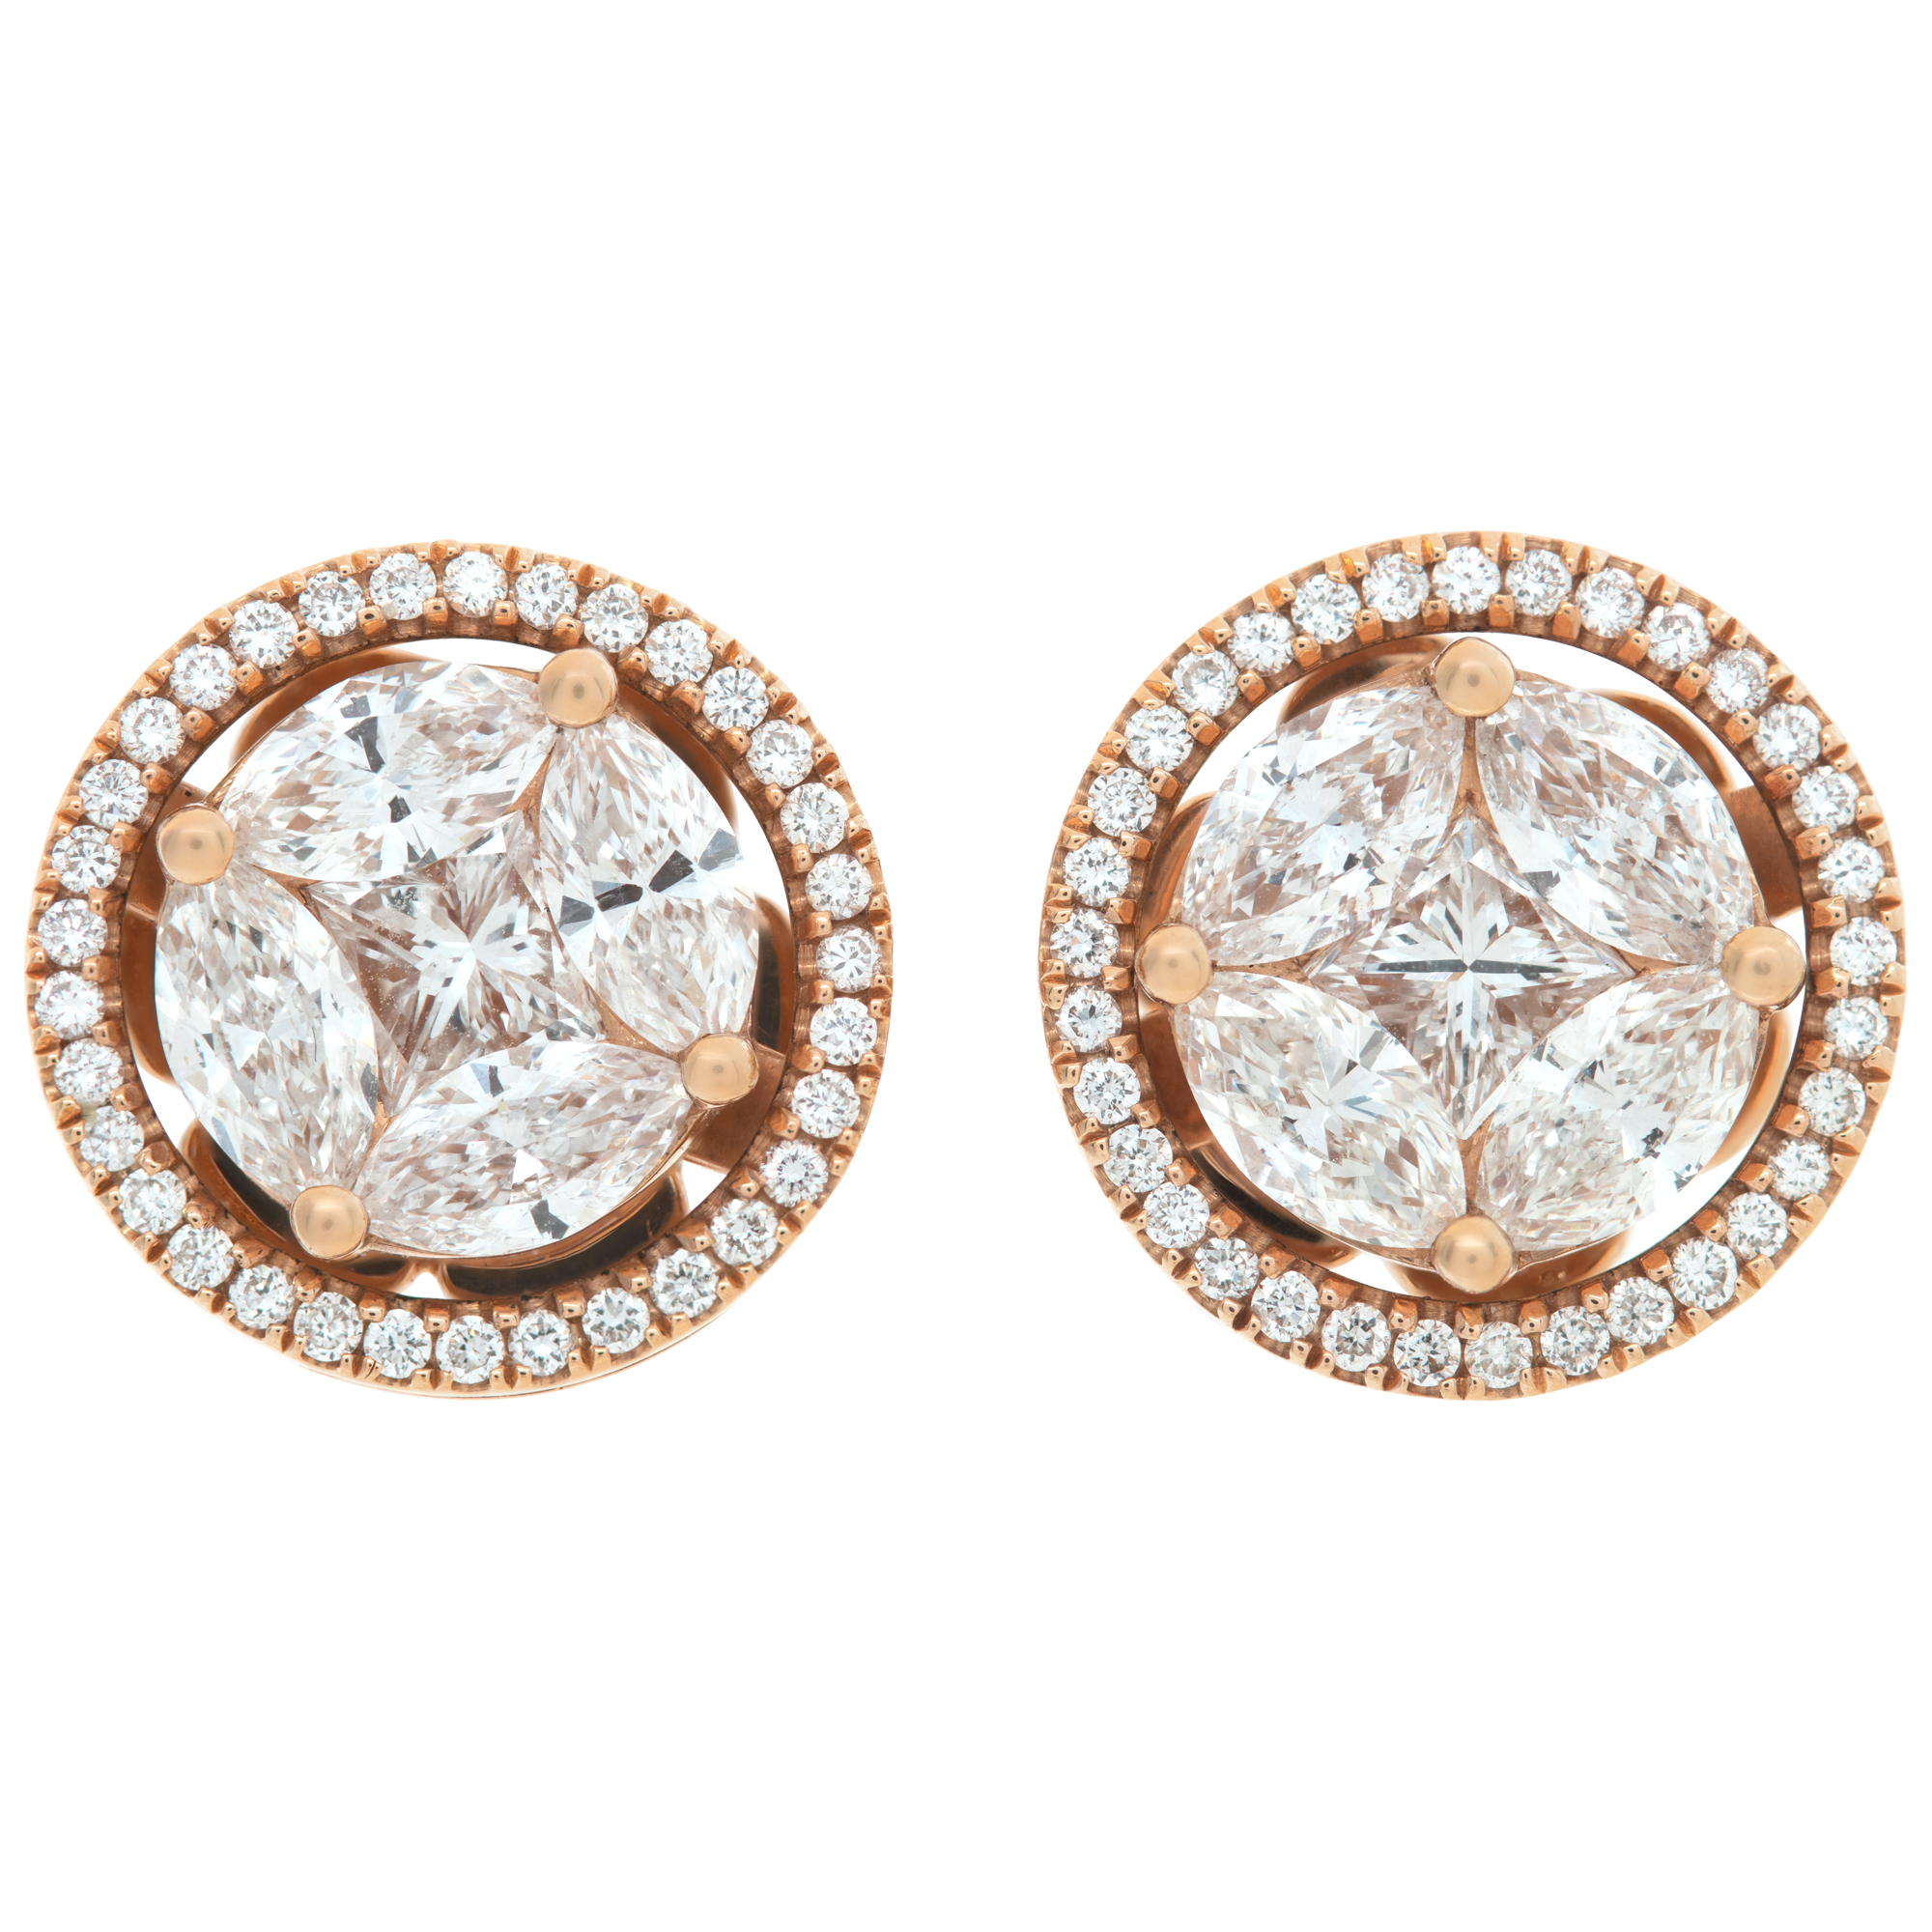 Halo illusion set diamond studs in 18k rose gold with 2.75 carats in diamonds image 1